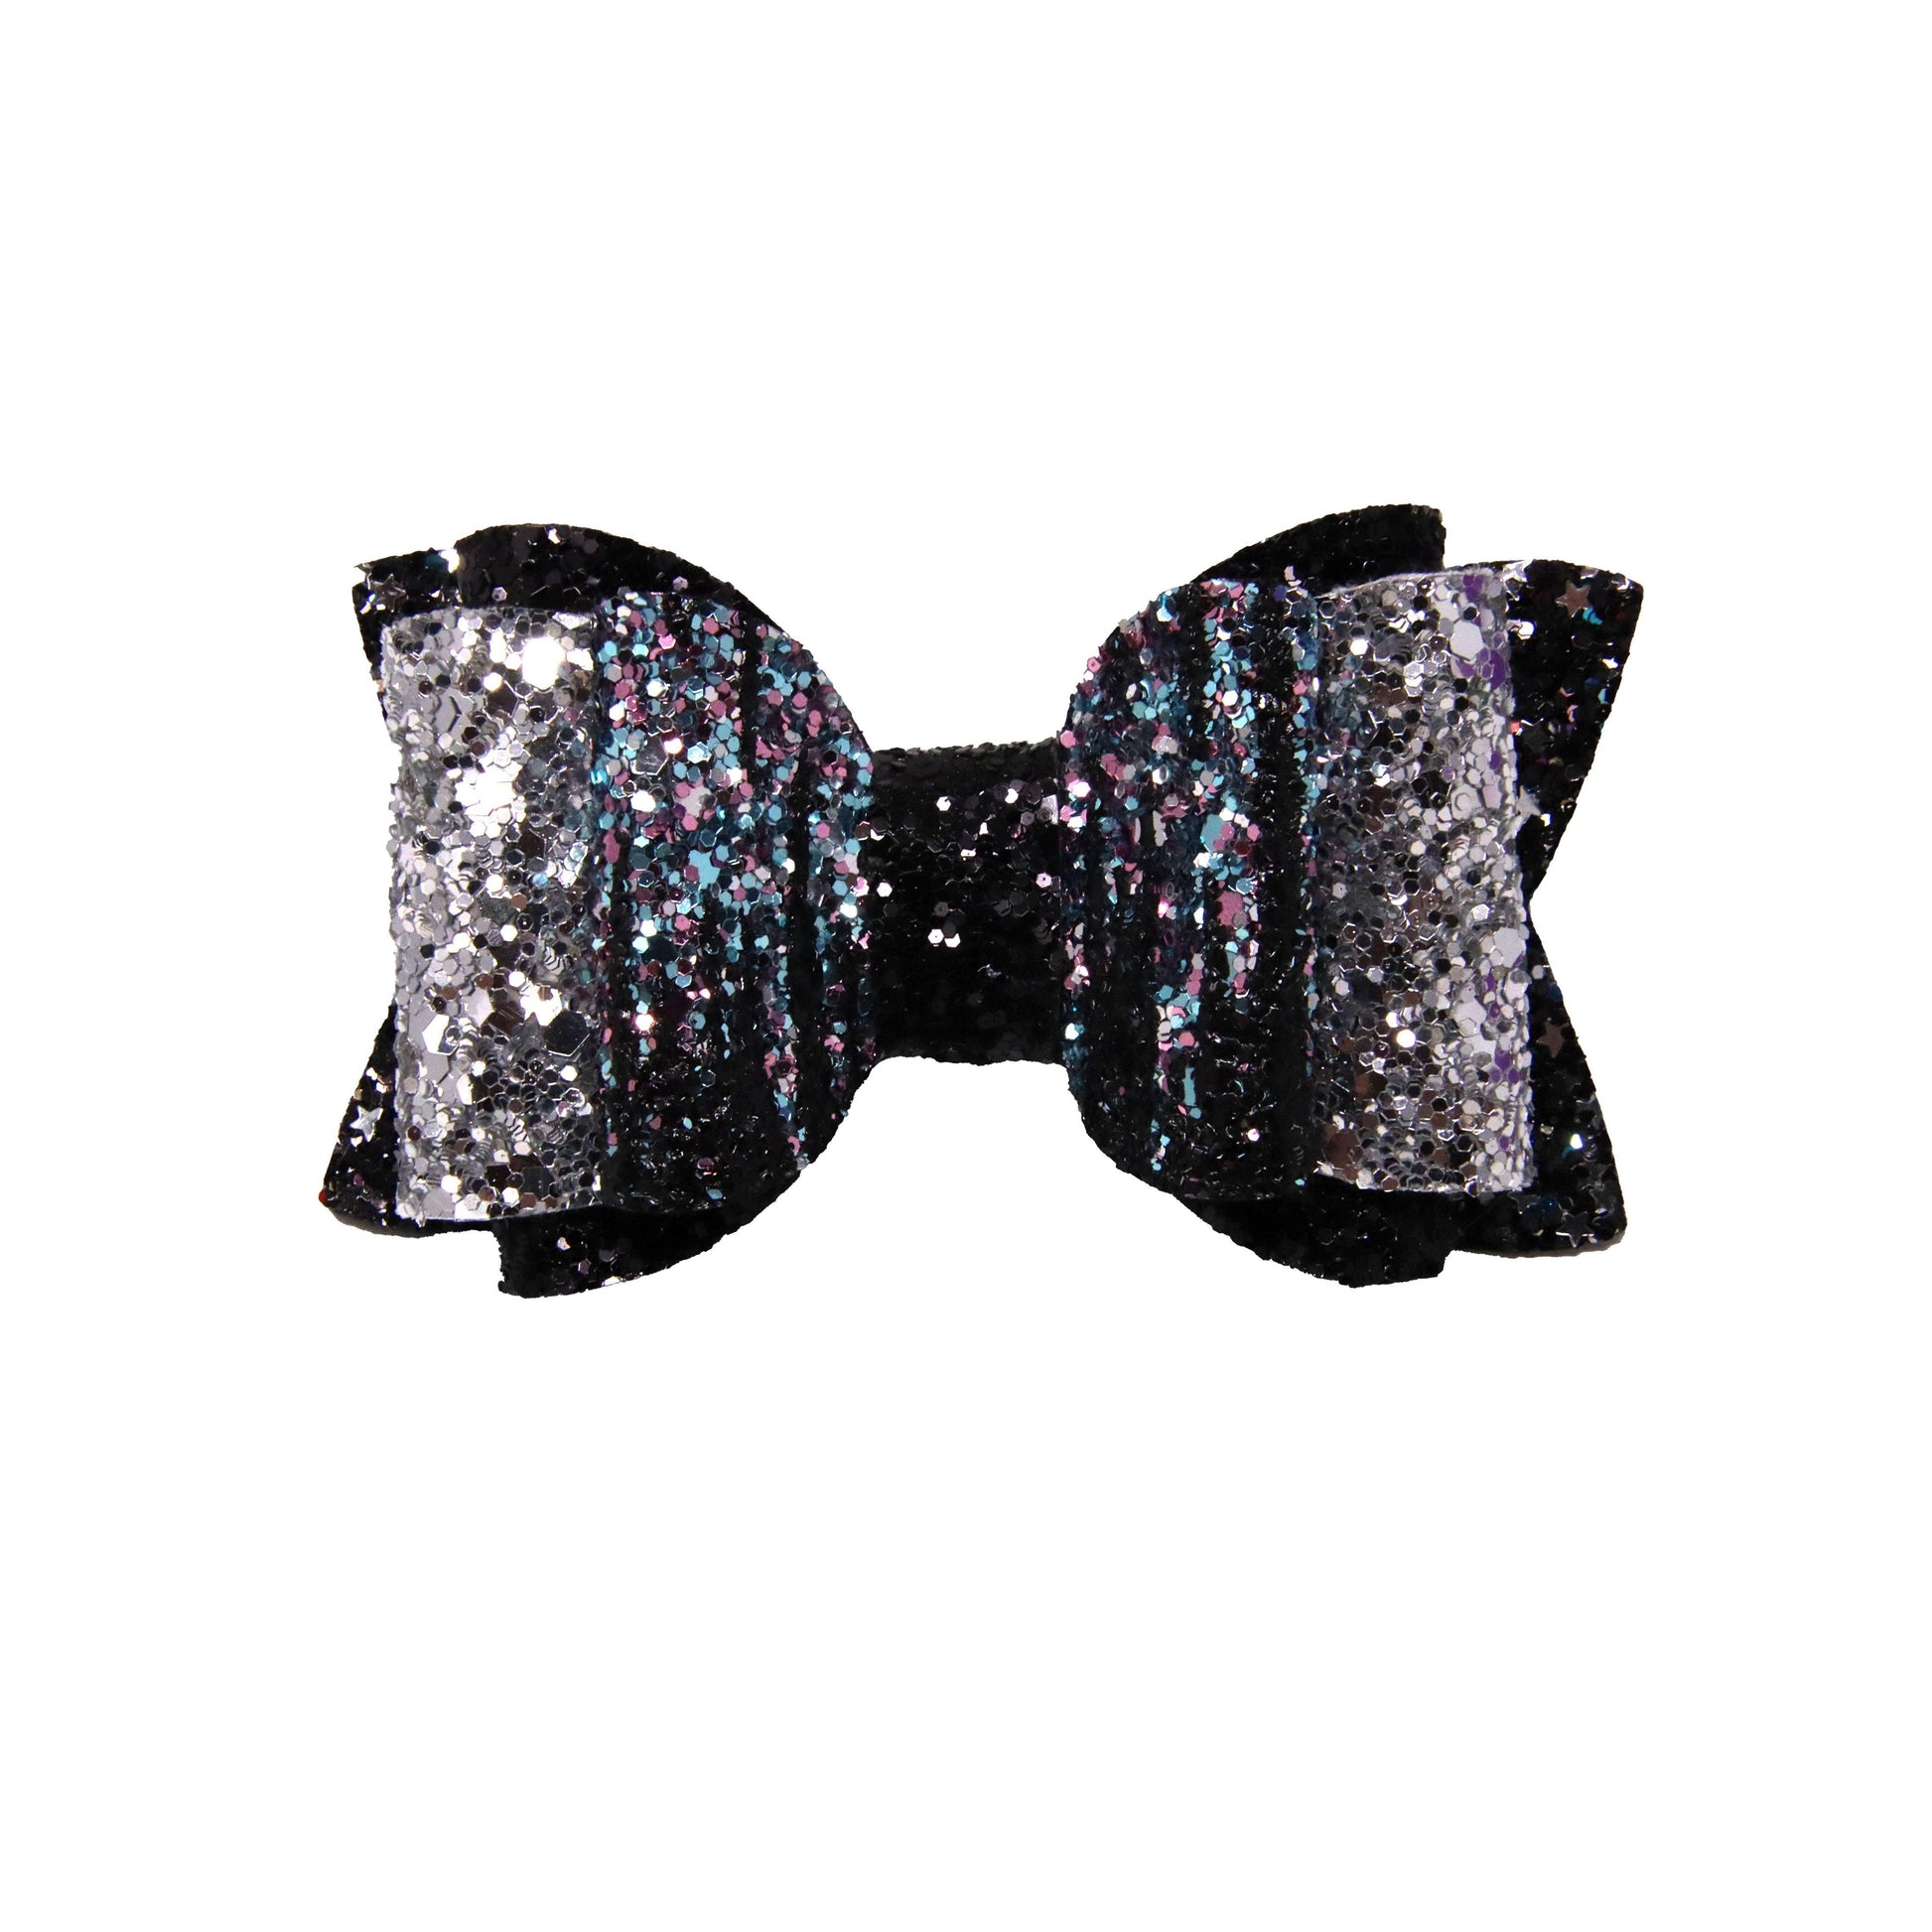 Black & Silver Double Dressed-up Chloe Bow 4.5"